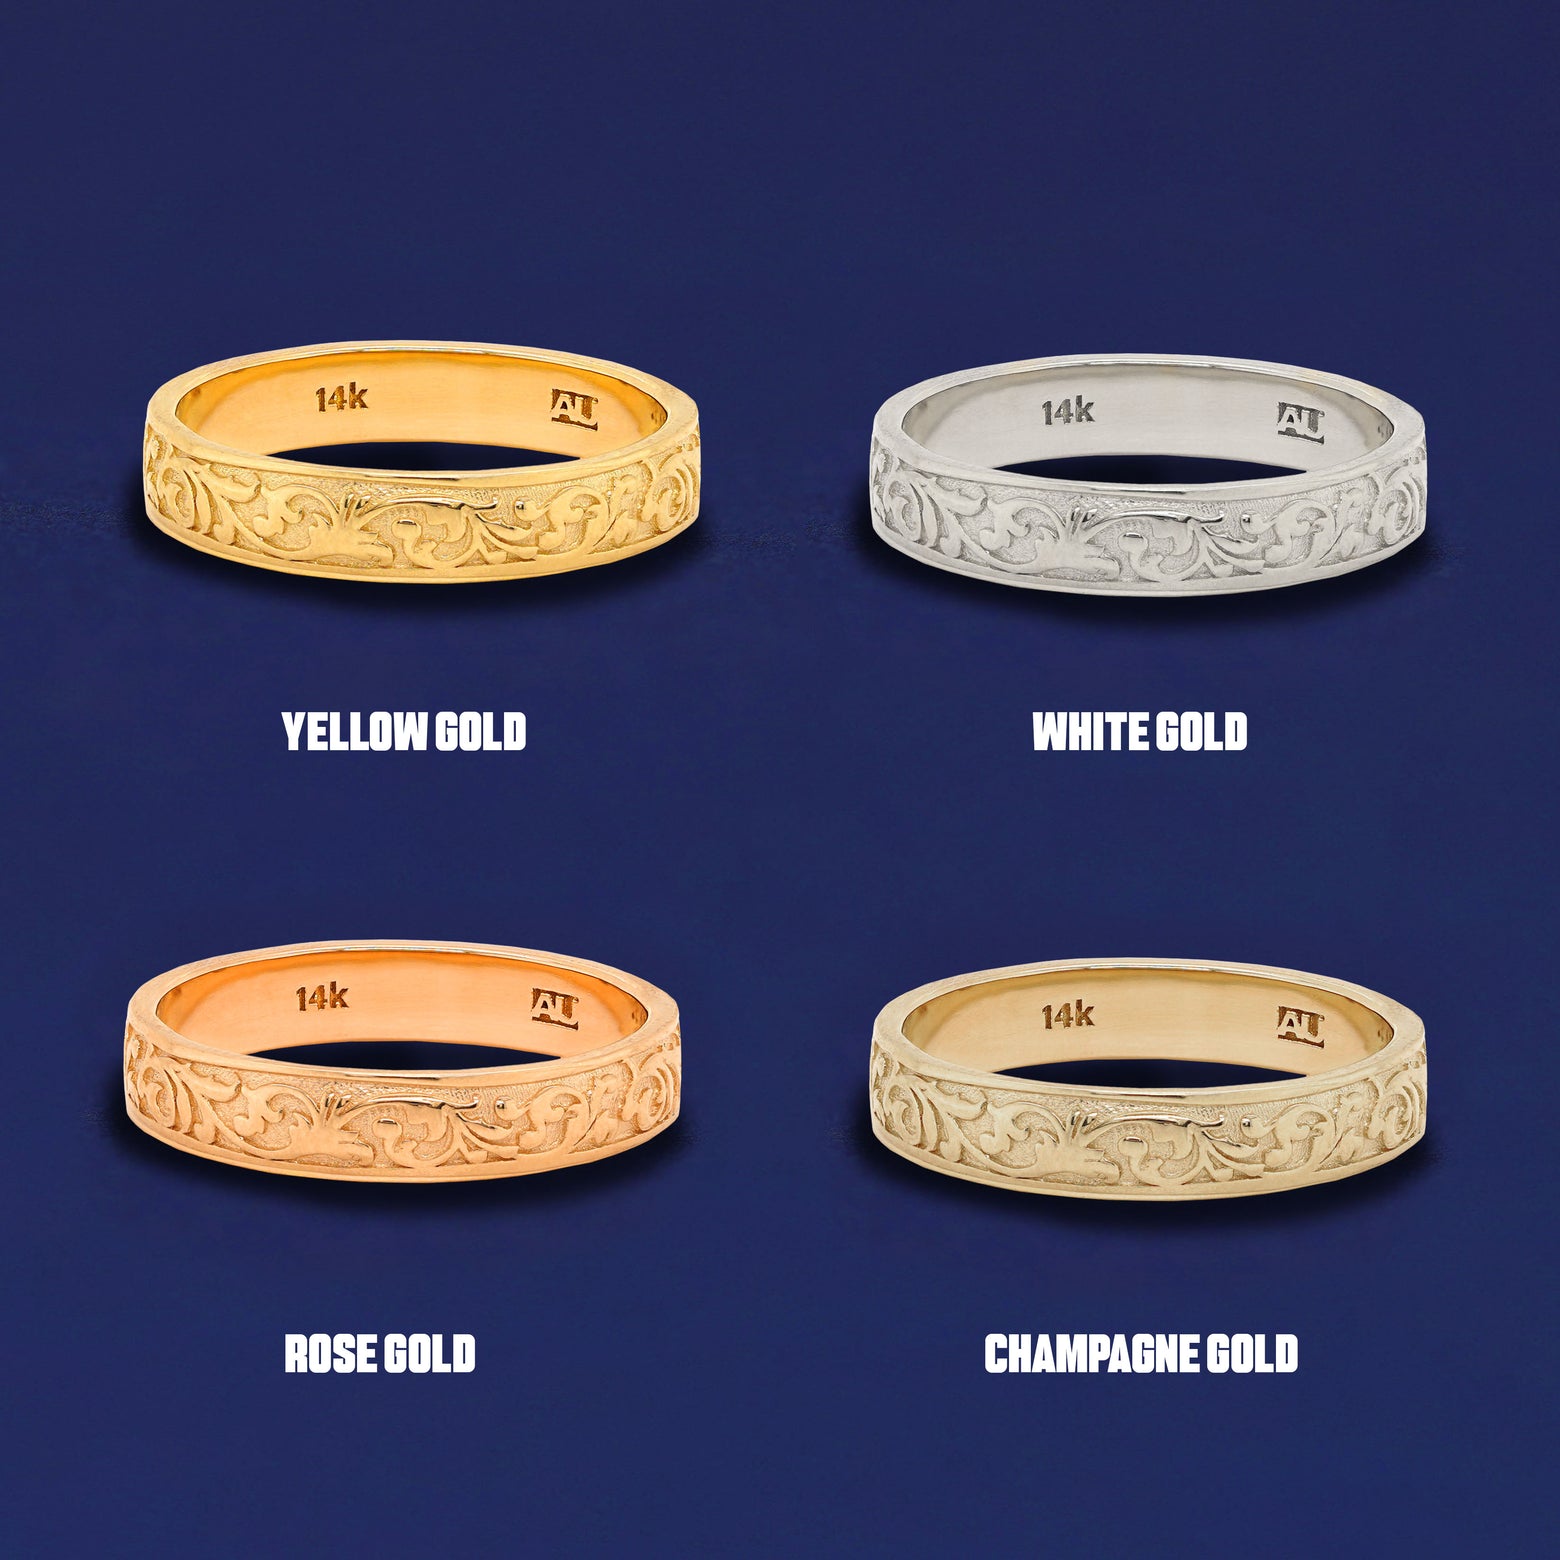 Four versions of the Filigree Band shown in options of yellow, white, rose and champagne gold